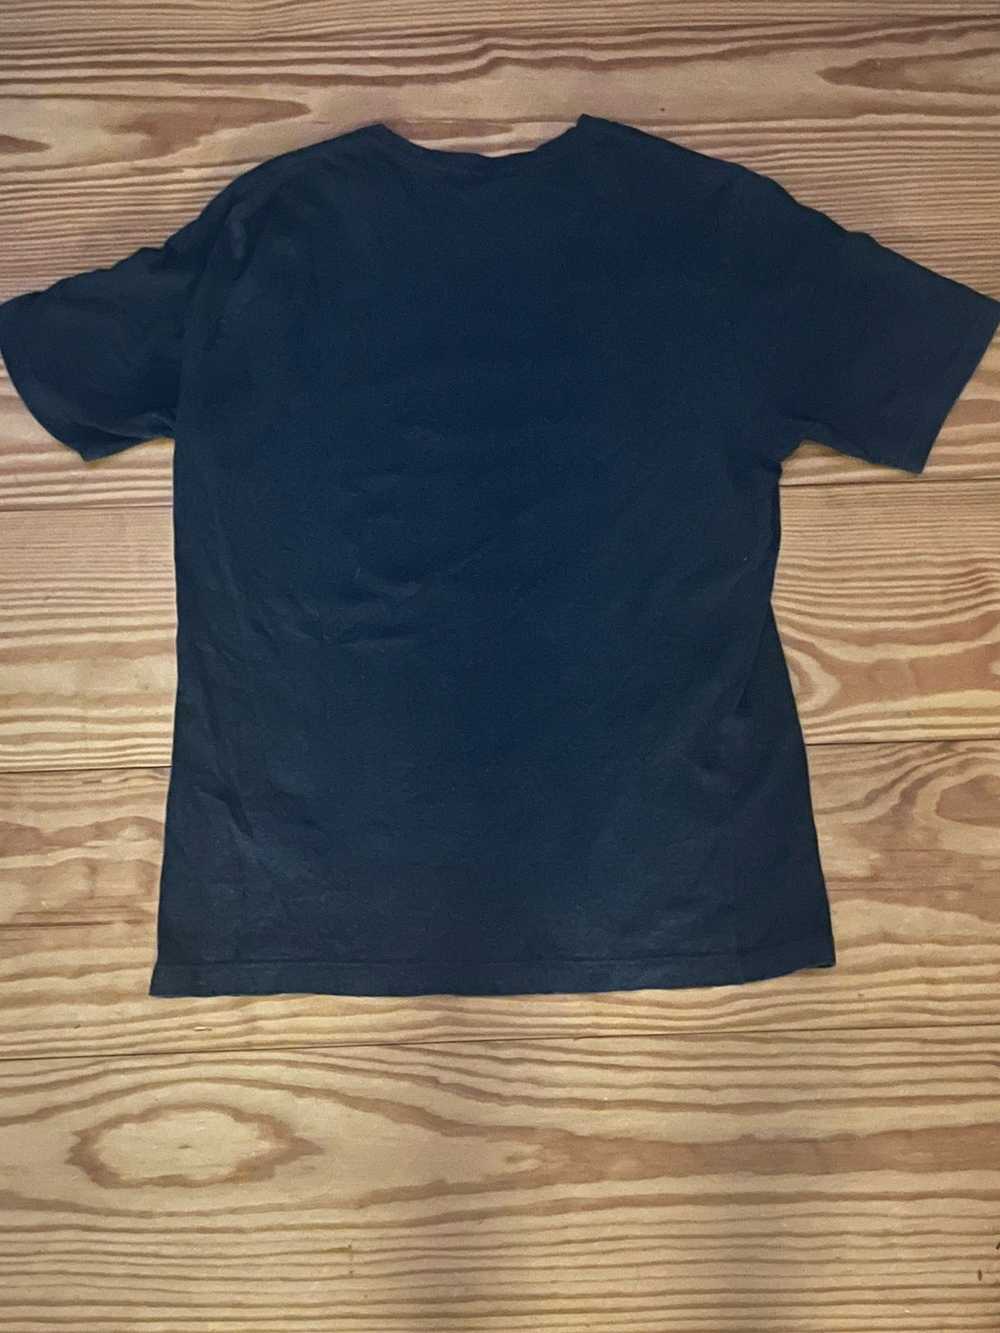 Undercover Undercover apple fang tee - image 2